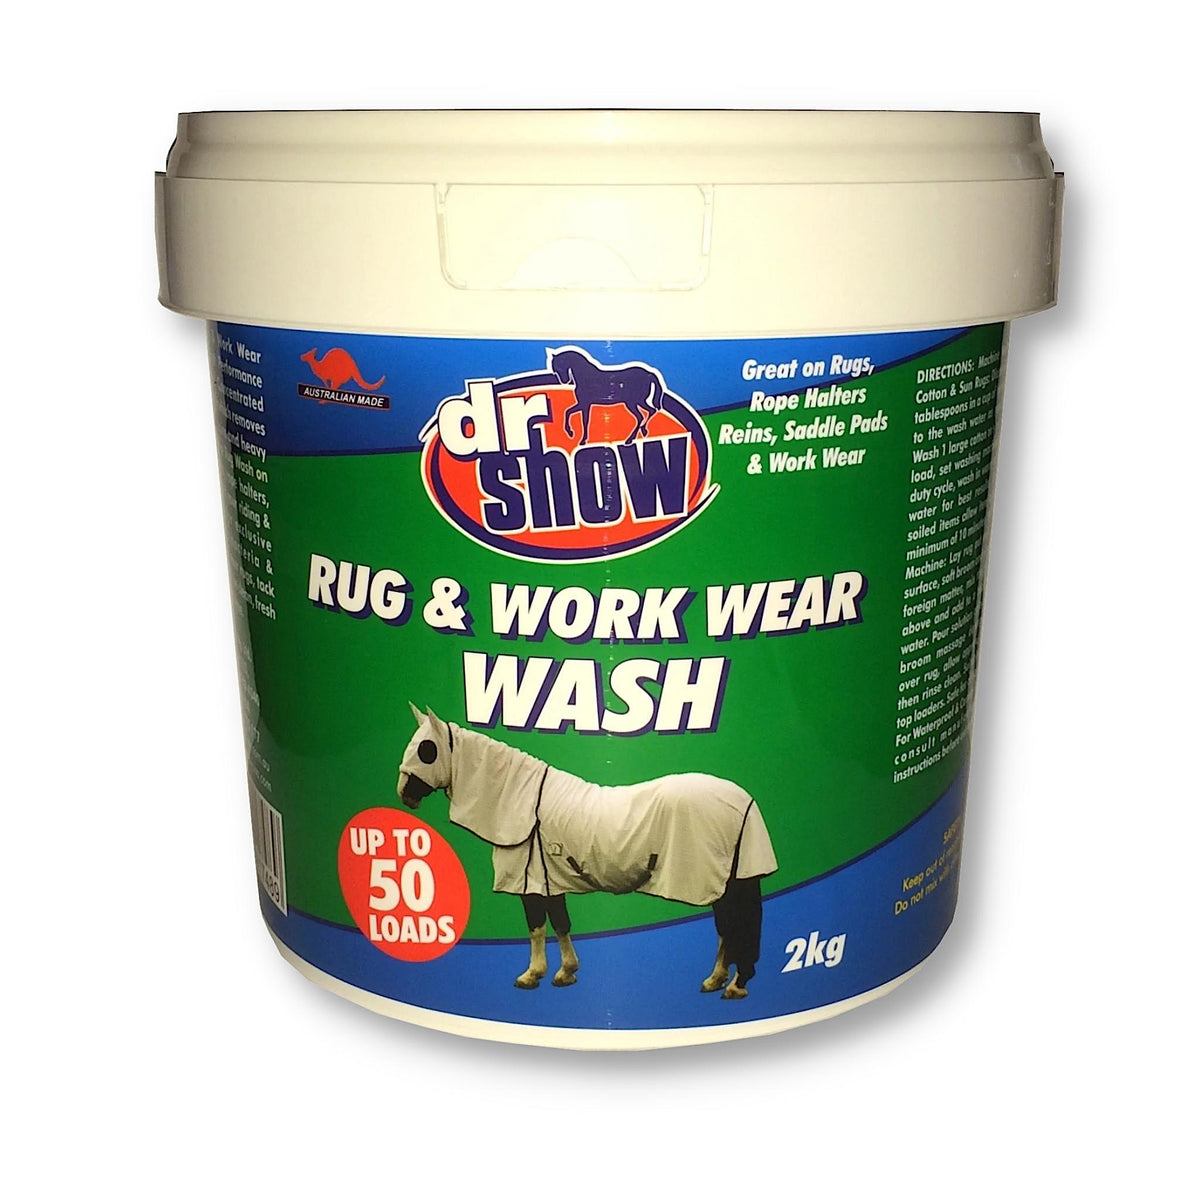 Tub of &quot;Rug and Work Wear Wash.&quot;